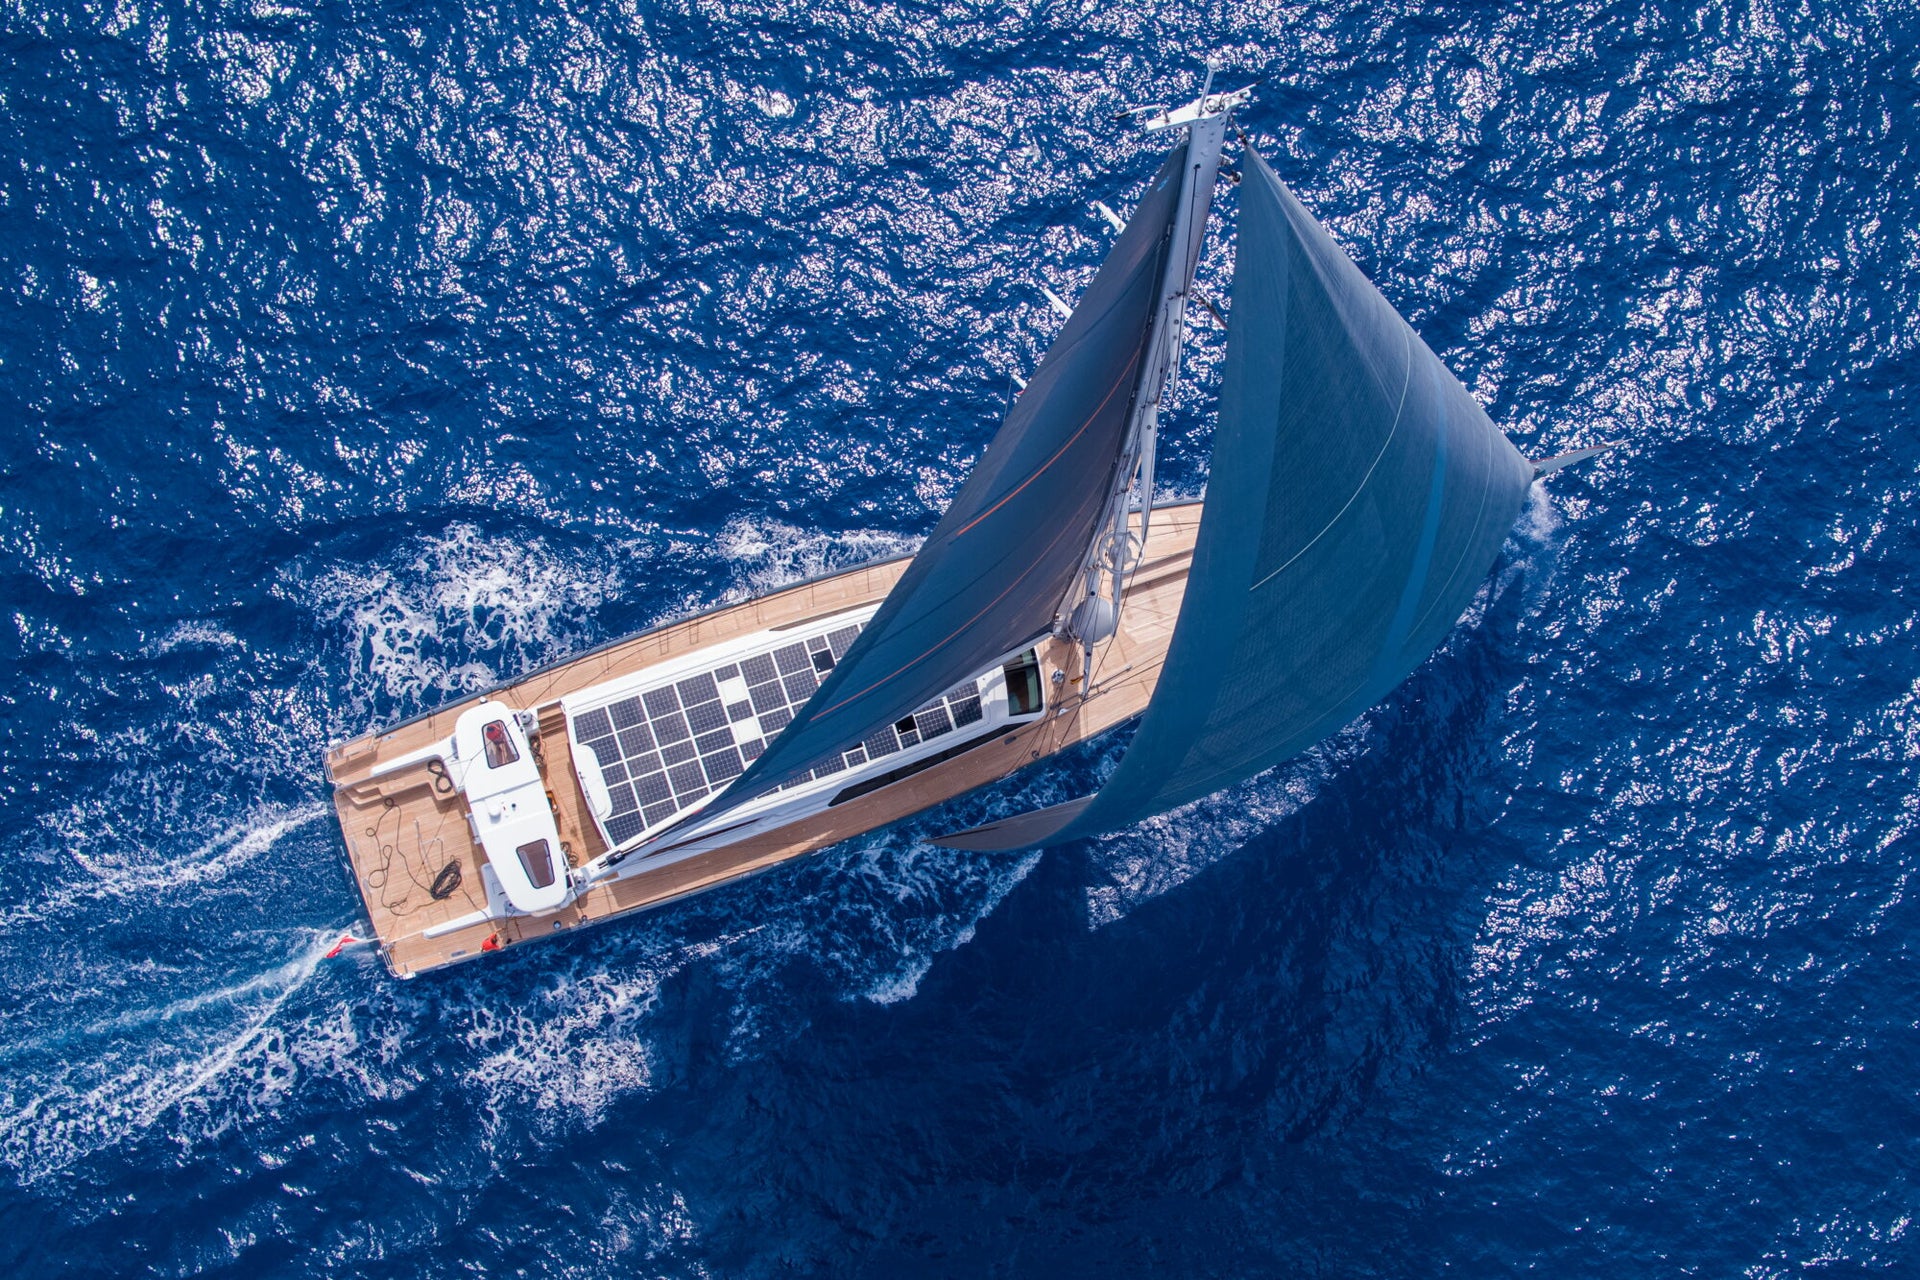 RECENTLY LAUNCHED: BALTIC YACHTS - PATH